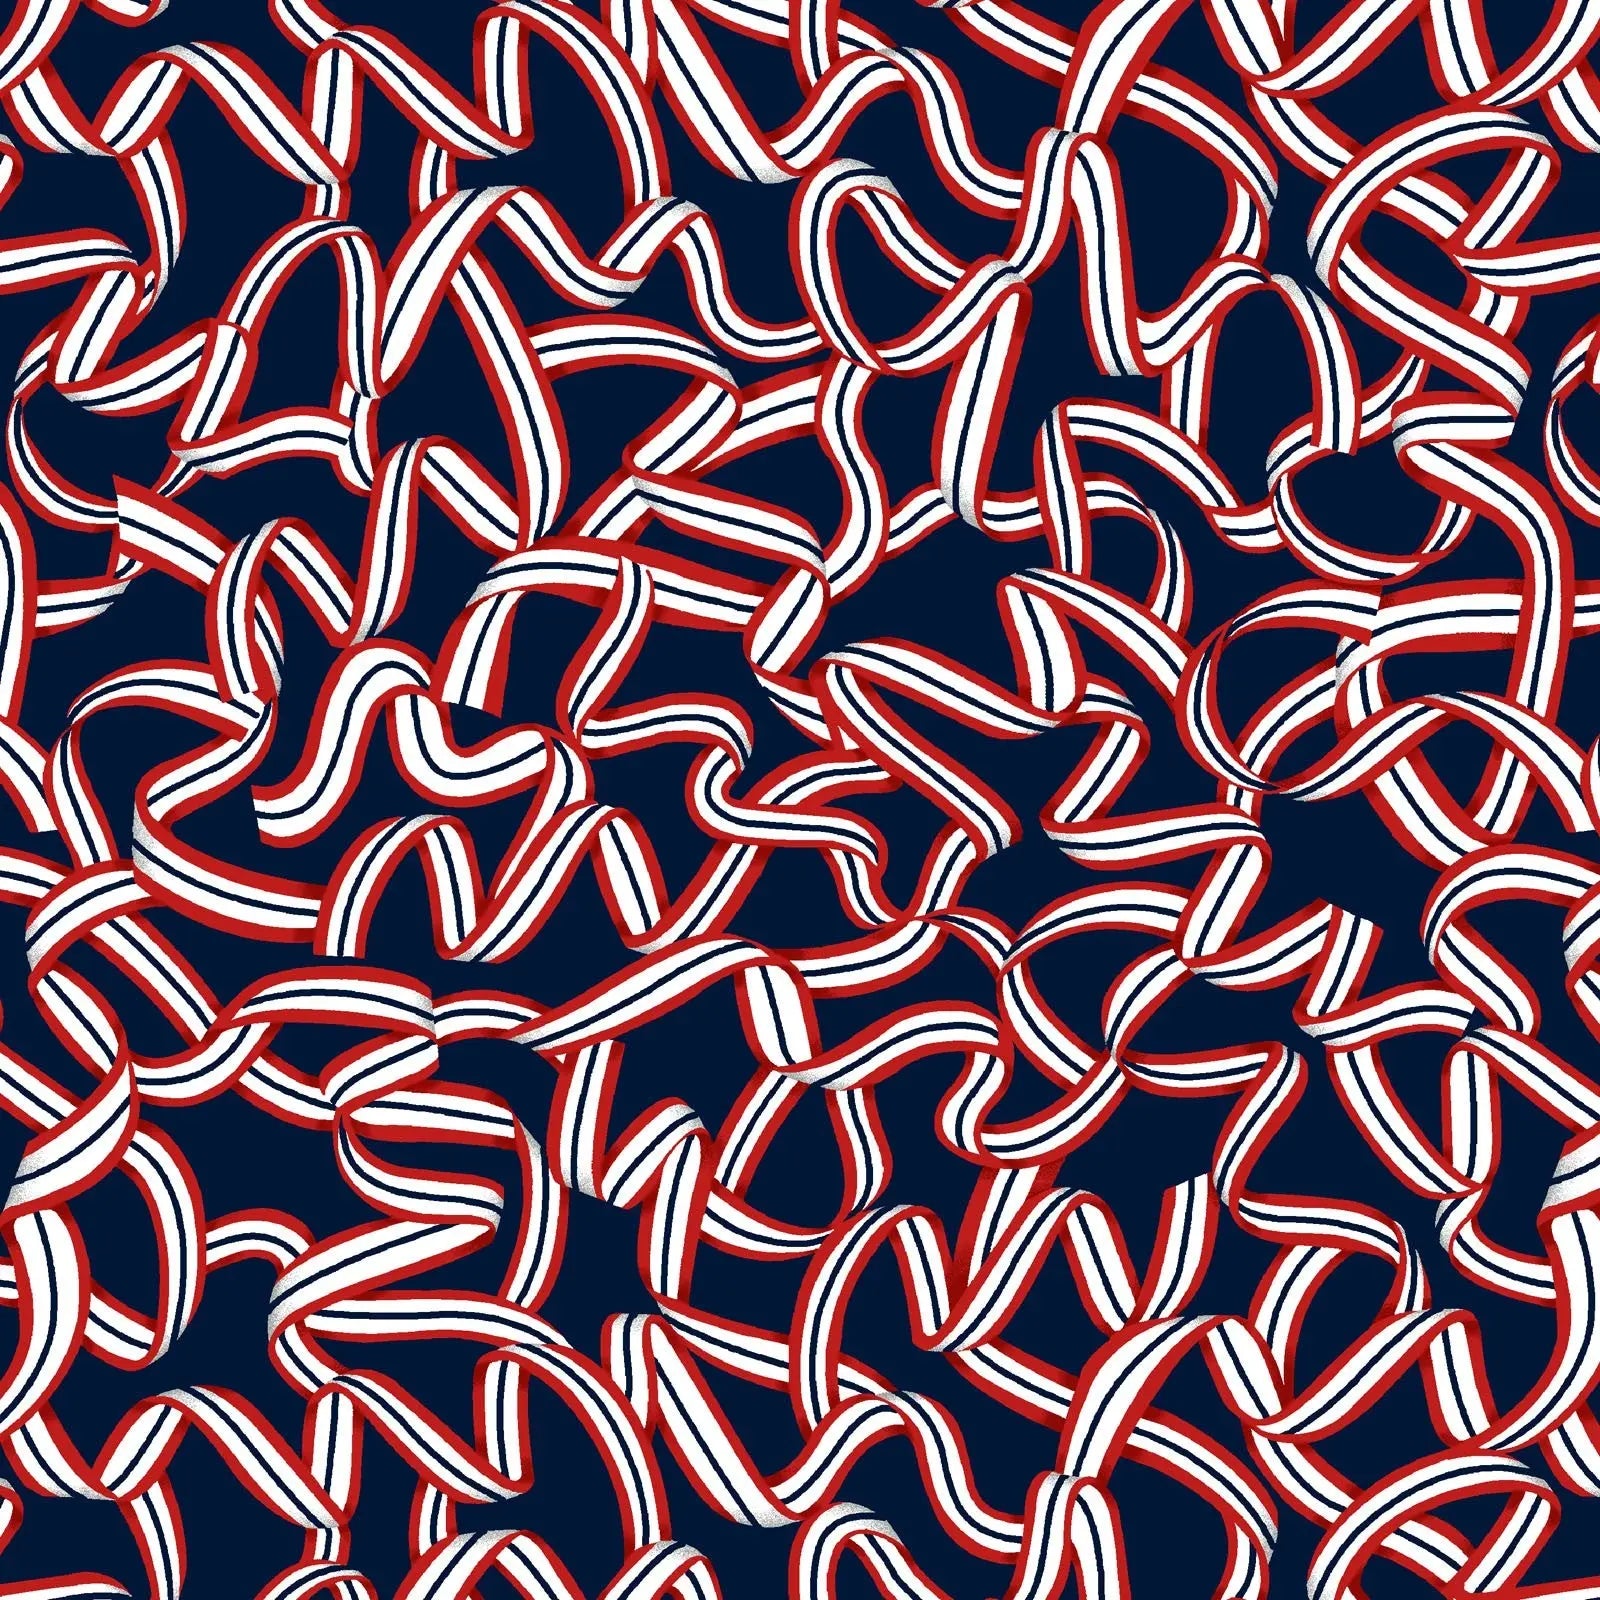 Red White and Starry Blue Too Ribbon Cotton Wideback Fabric per yard